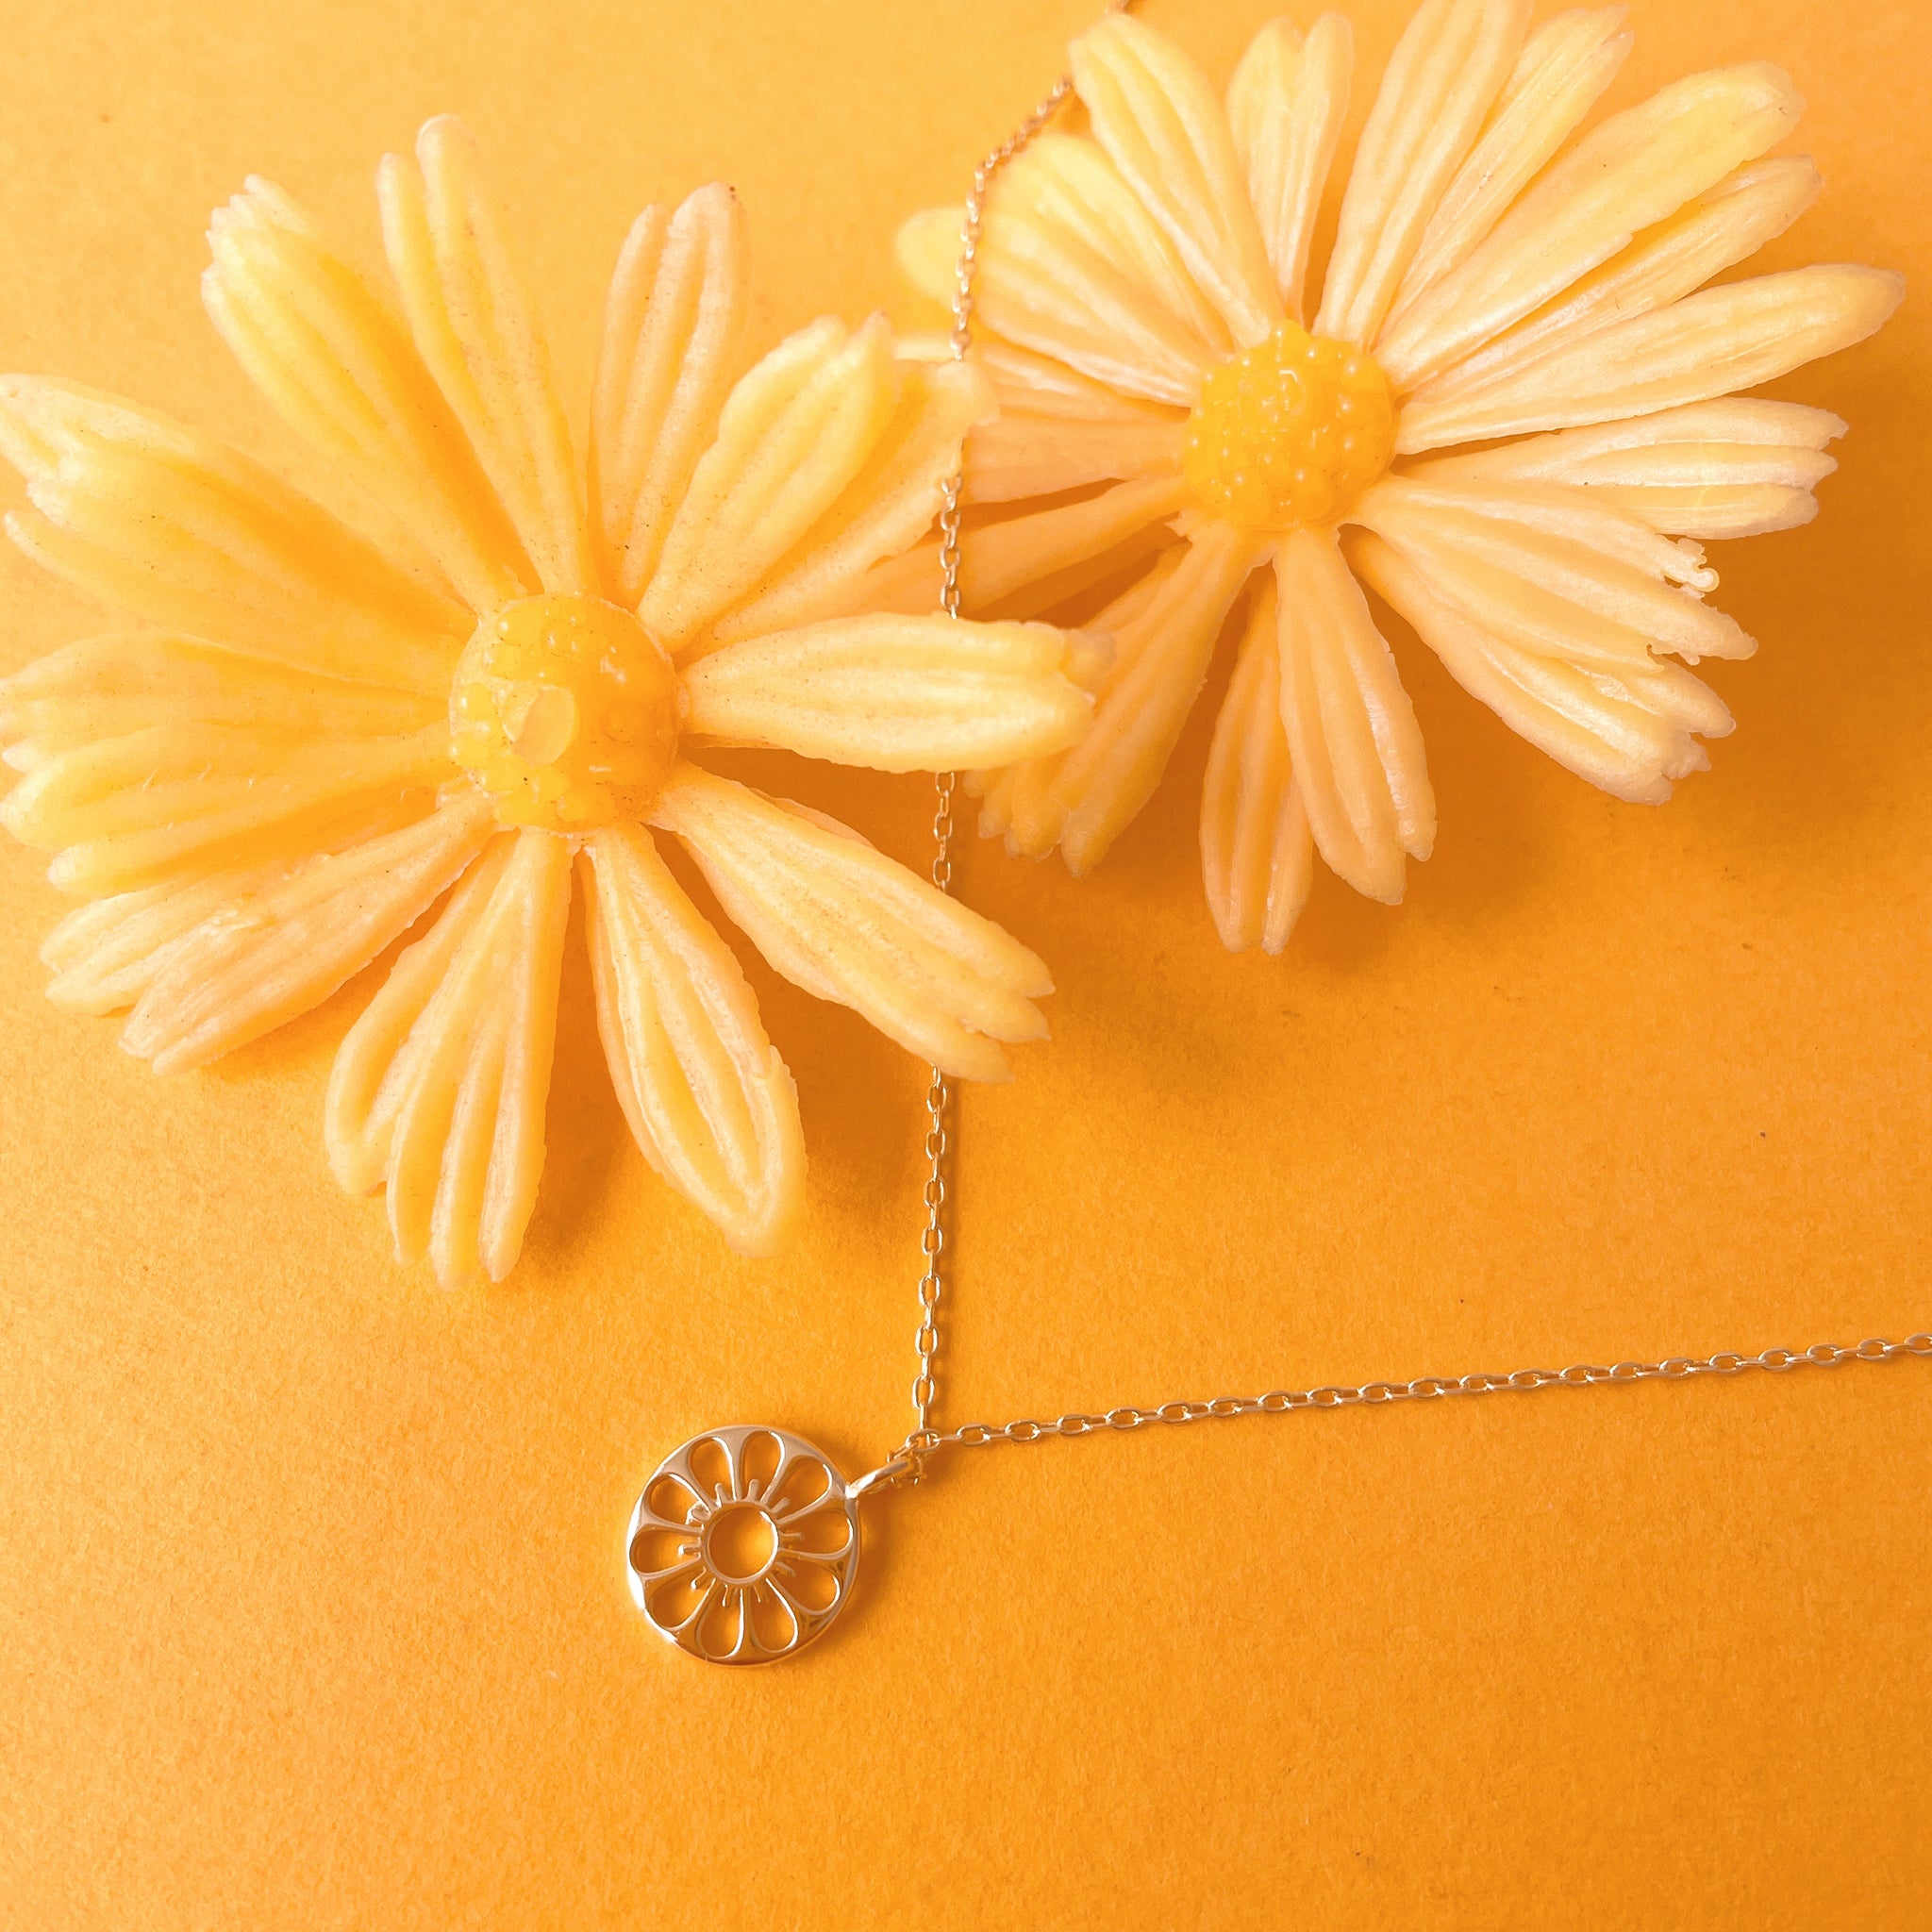 a gold daisy necklace lays on a yellow-orange ground with yellow flowers